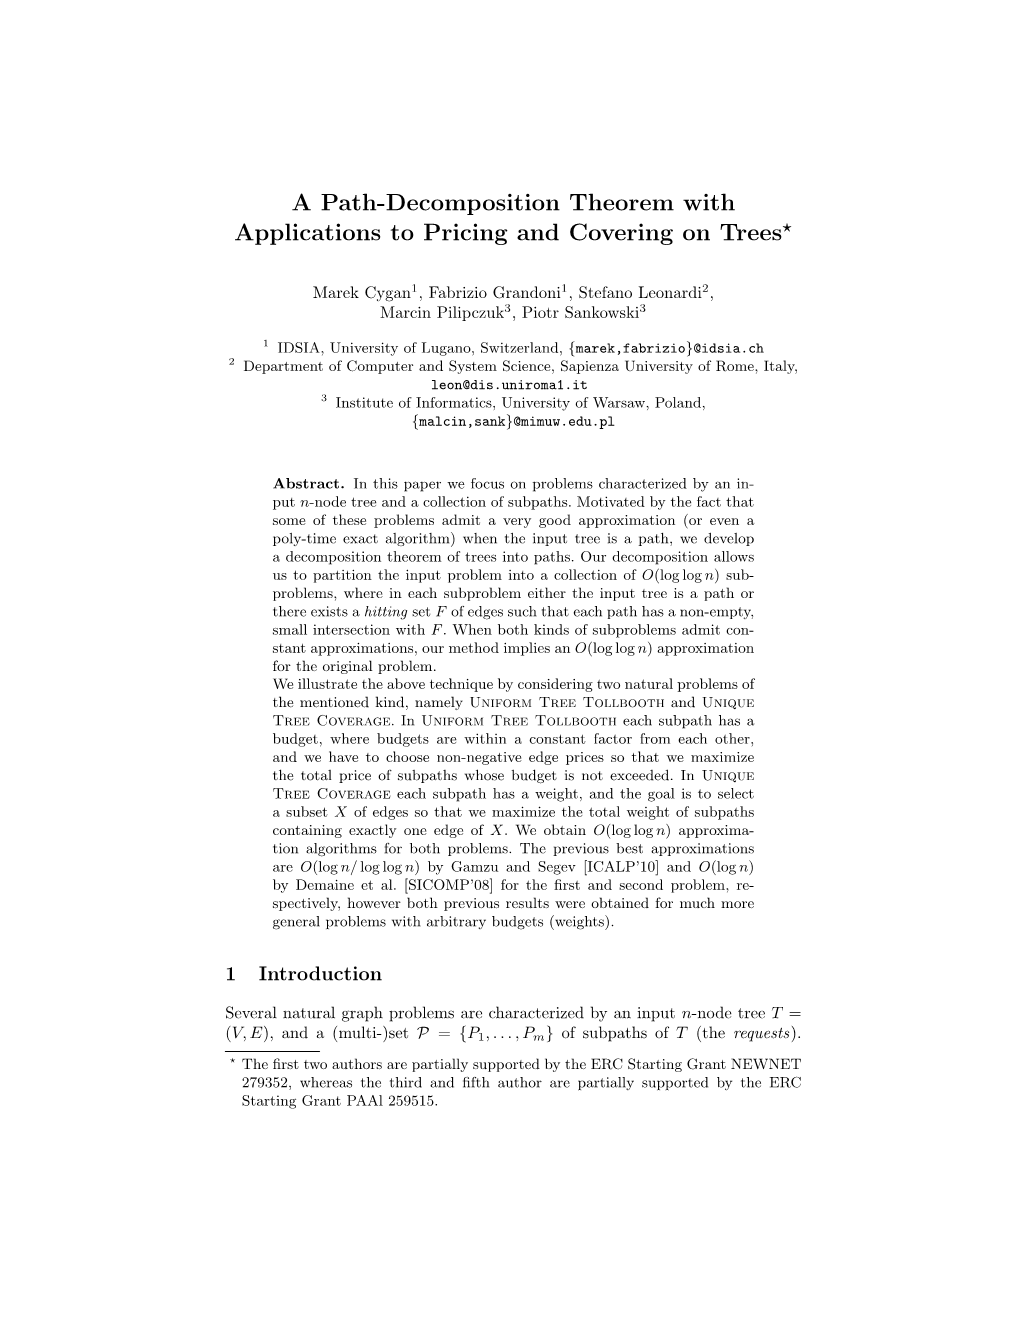 A Path-Decomposition Theorem with Applications to Pricing and Covering on Trees?